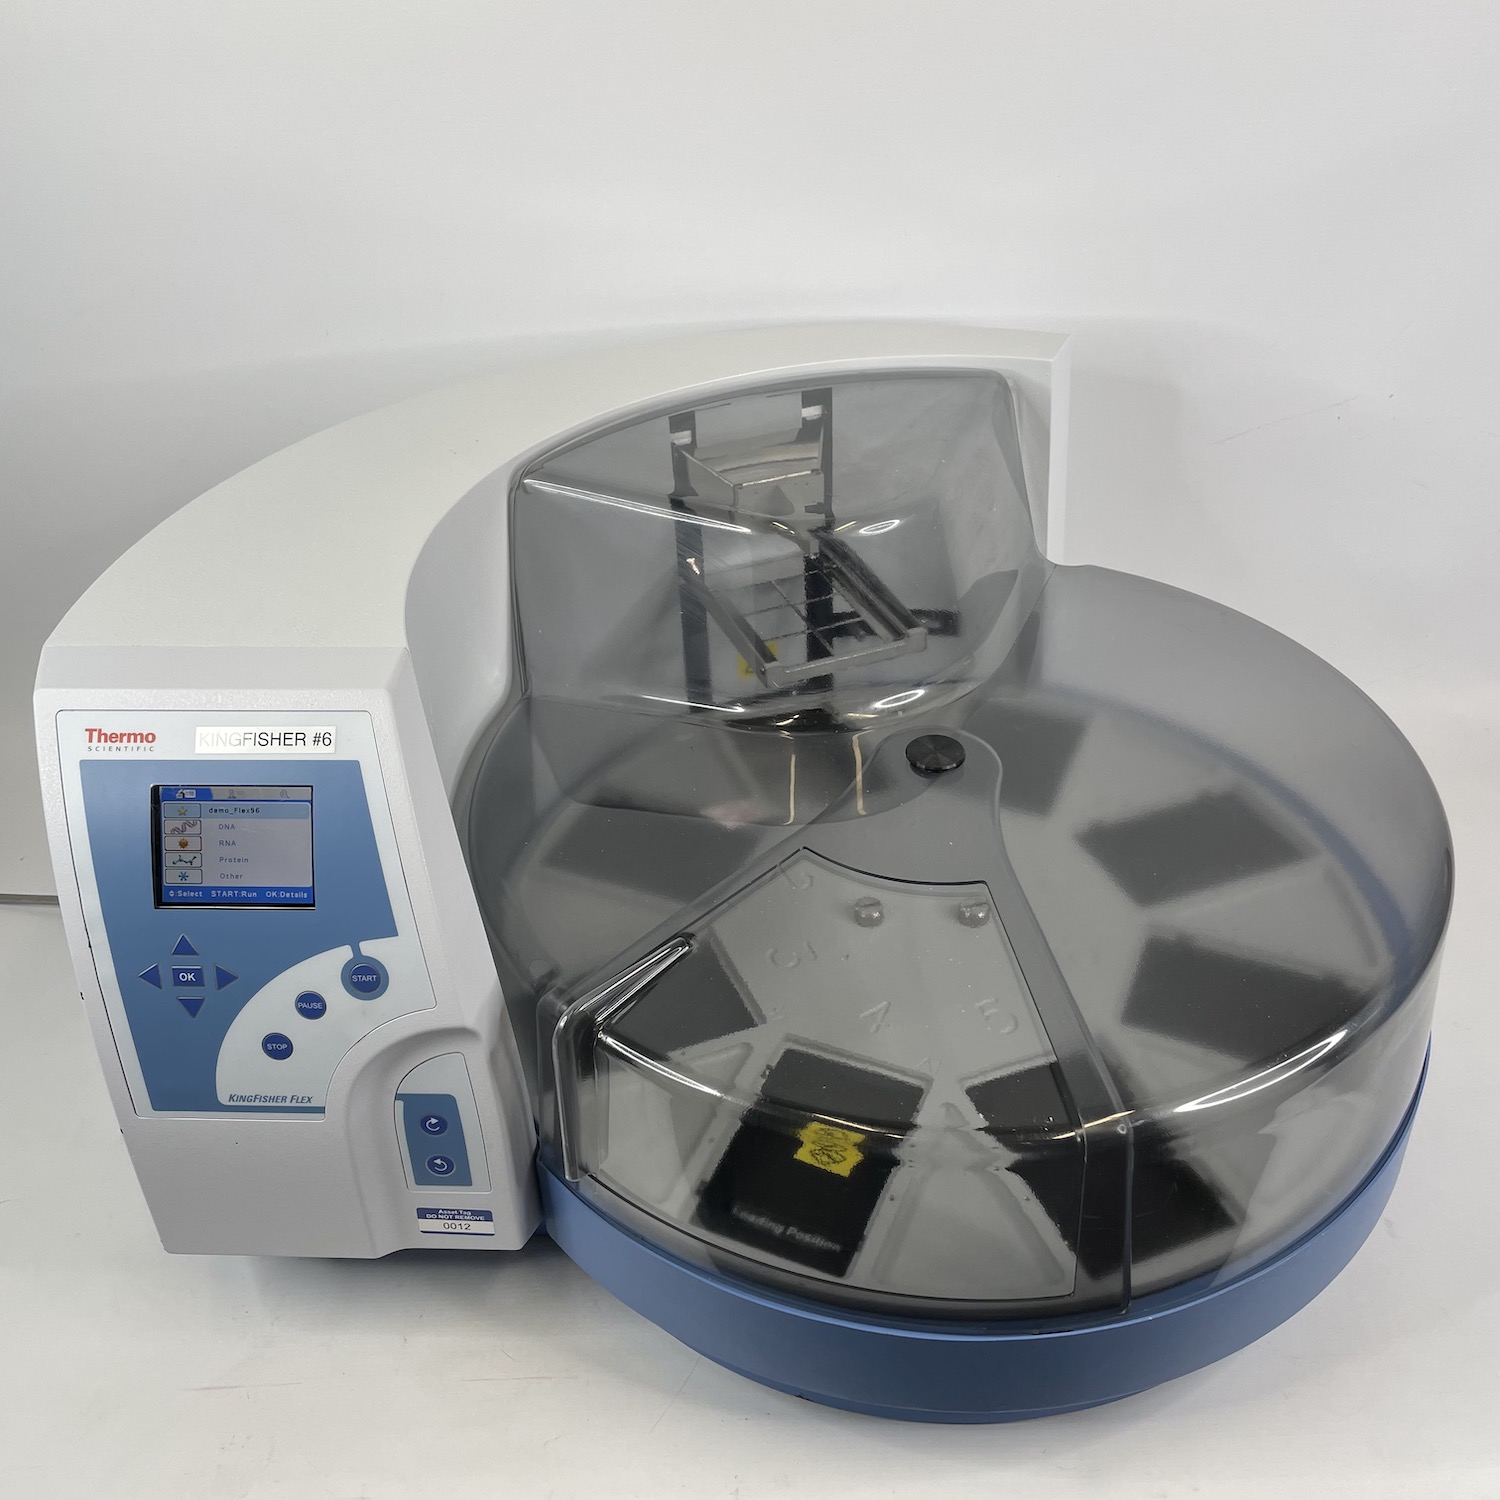 thermo scientific | kingFisher | flex purification system | 5400630